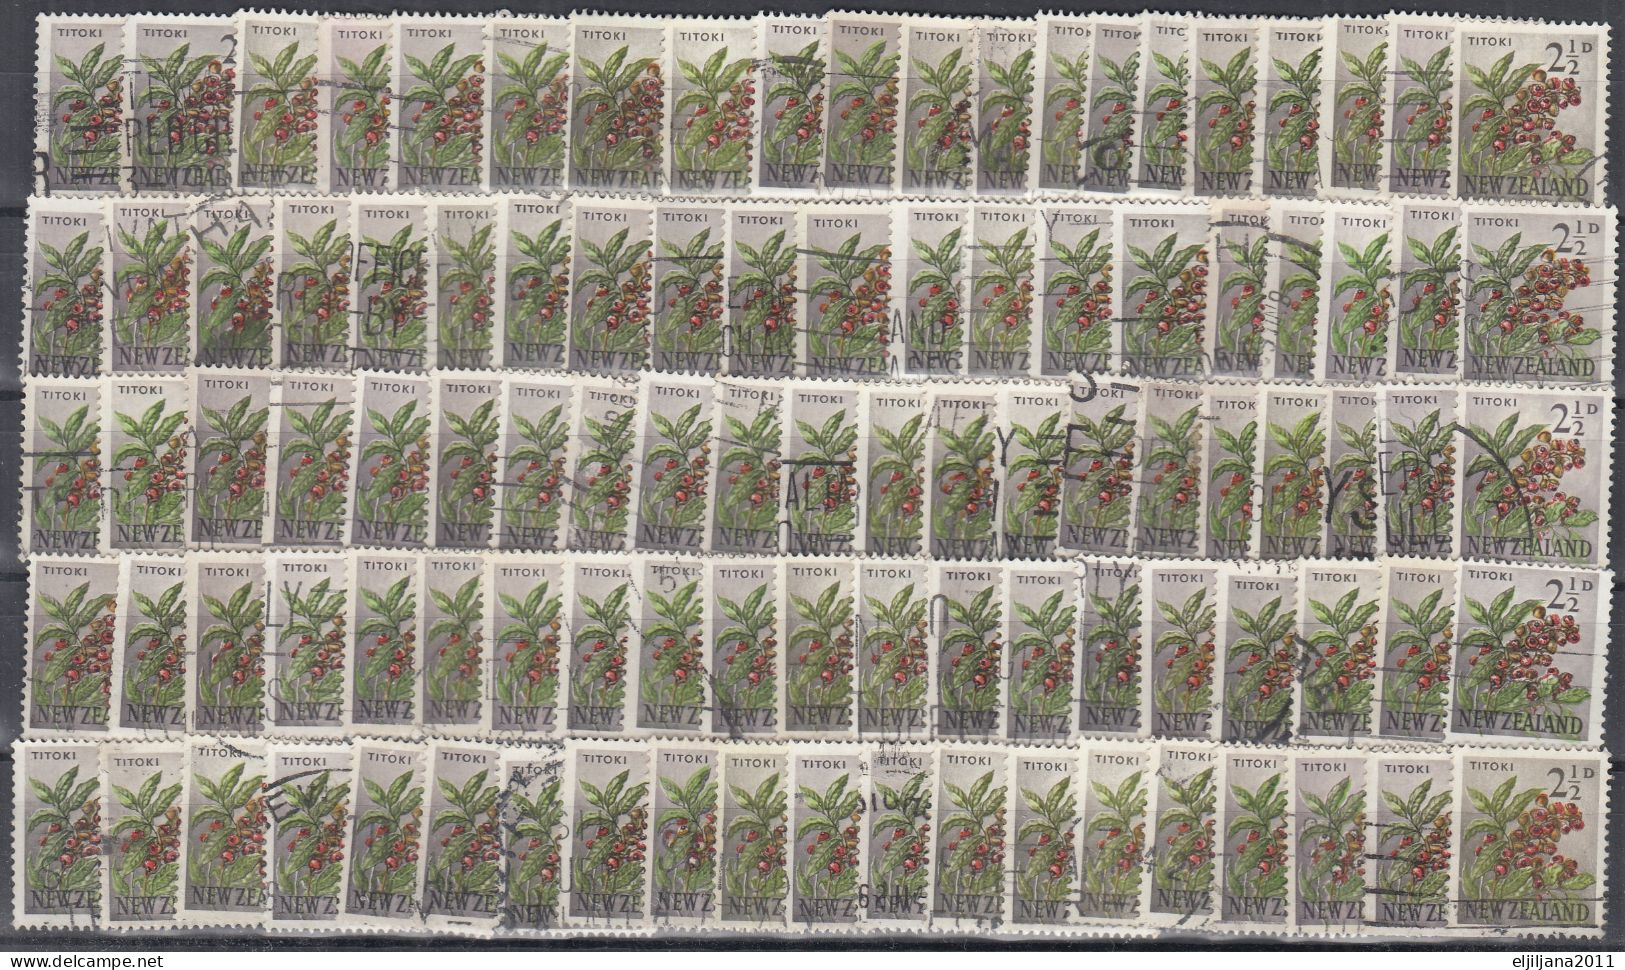 ⁕ New Zealand 1967 ⁕ TITOKI Stamps 2 ½ D. ⁕ 100v Used - Used Stamps